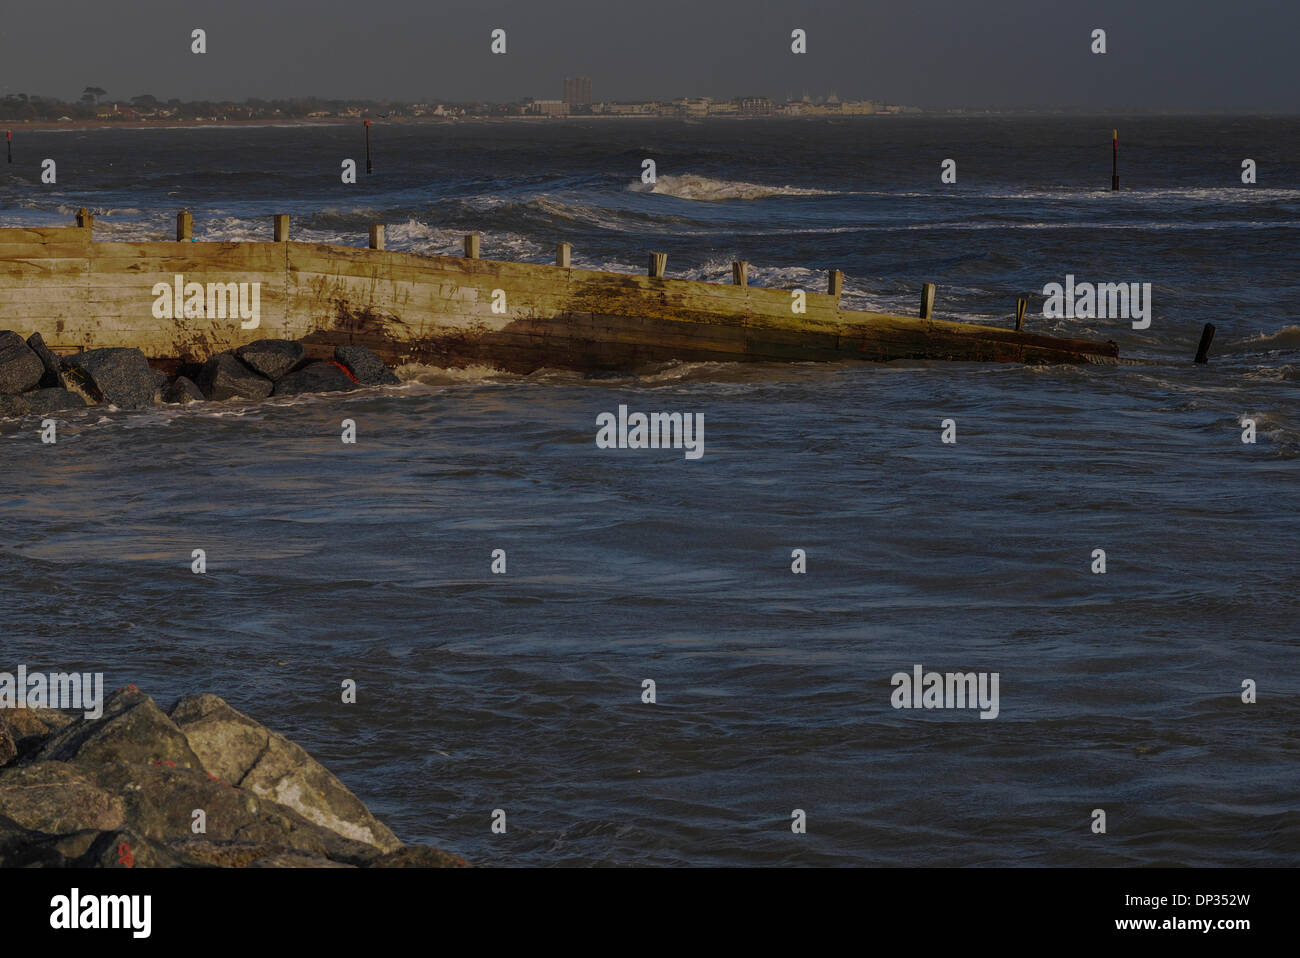 Pagham, West Sussex, UK. 7th January 2014. Large rocks from the tidal defense have fallen into the sea. One concerned resident said ' The sand is washing away from beneath the rocks and they are rolling into the sea'. This picture shows the swirling tide and part of the tidal rock defenses on the left. Credit:  David Burr/Alamy Live News Stock Photo